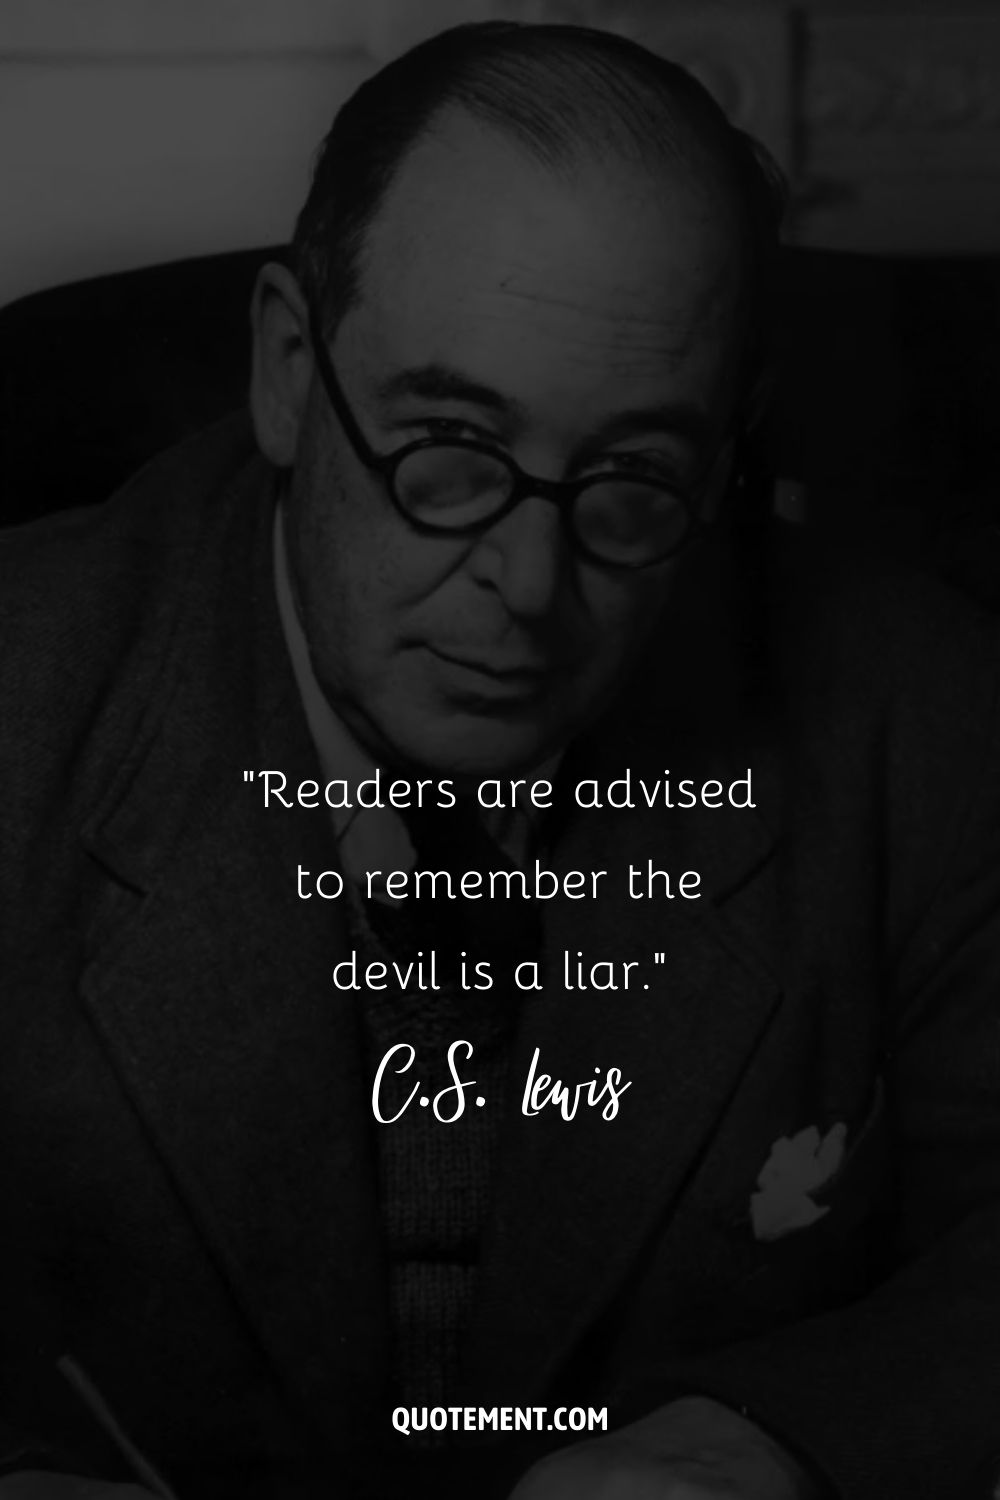 C.S. Lewis adopts a focused stance, pen in hand and glasses on